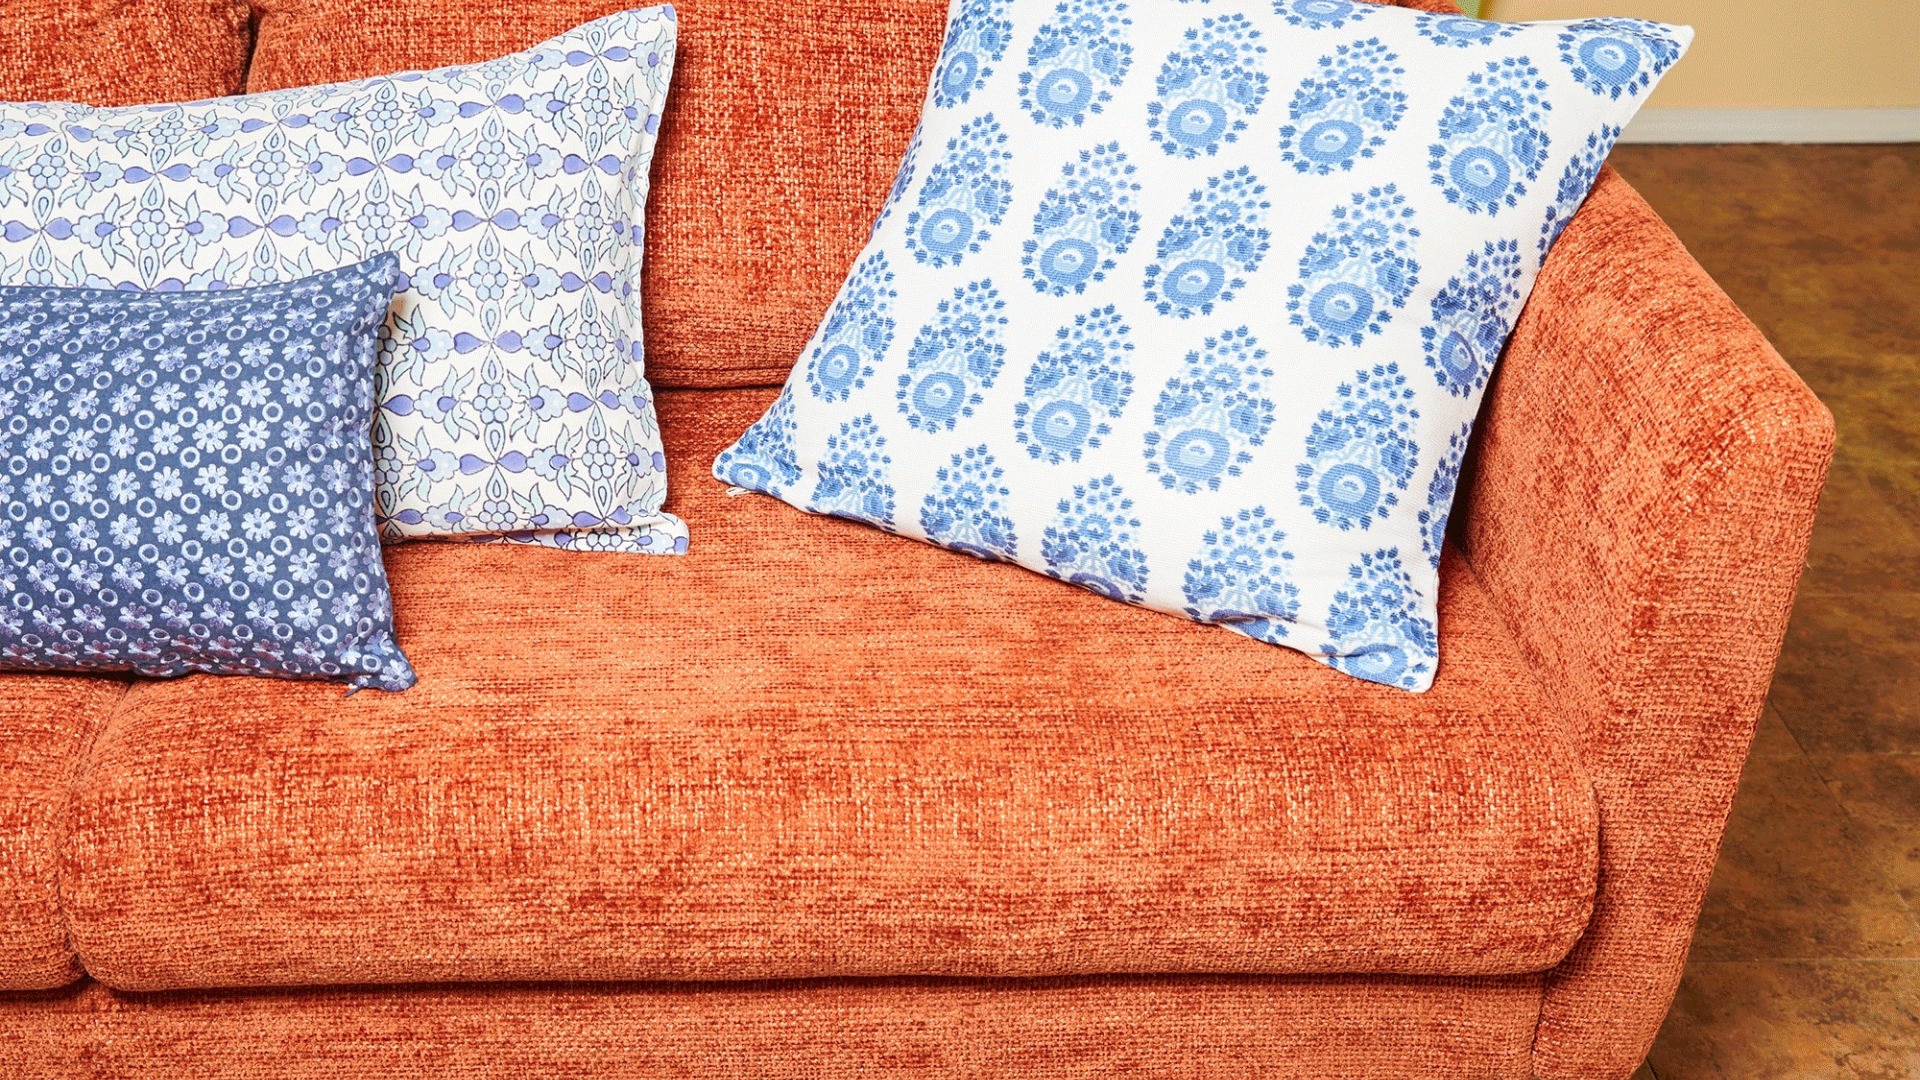 How To Pick Perfect Decorative Throw Pillows For Your Sofa, Bed Or